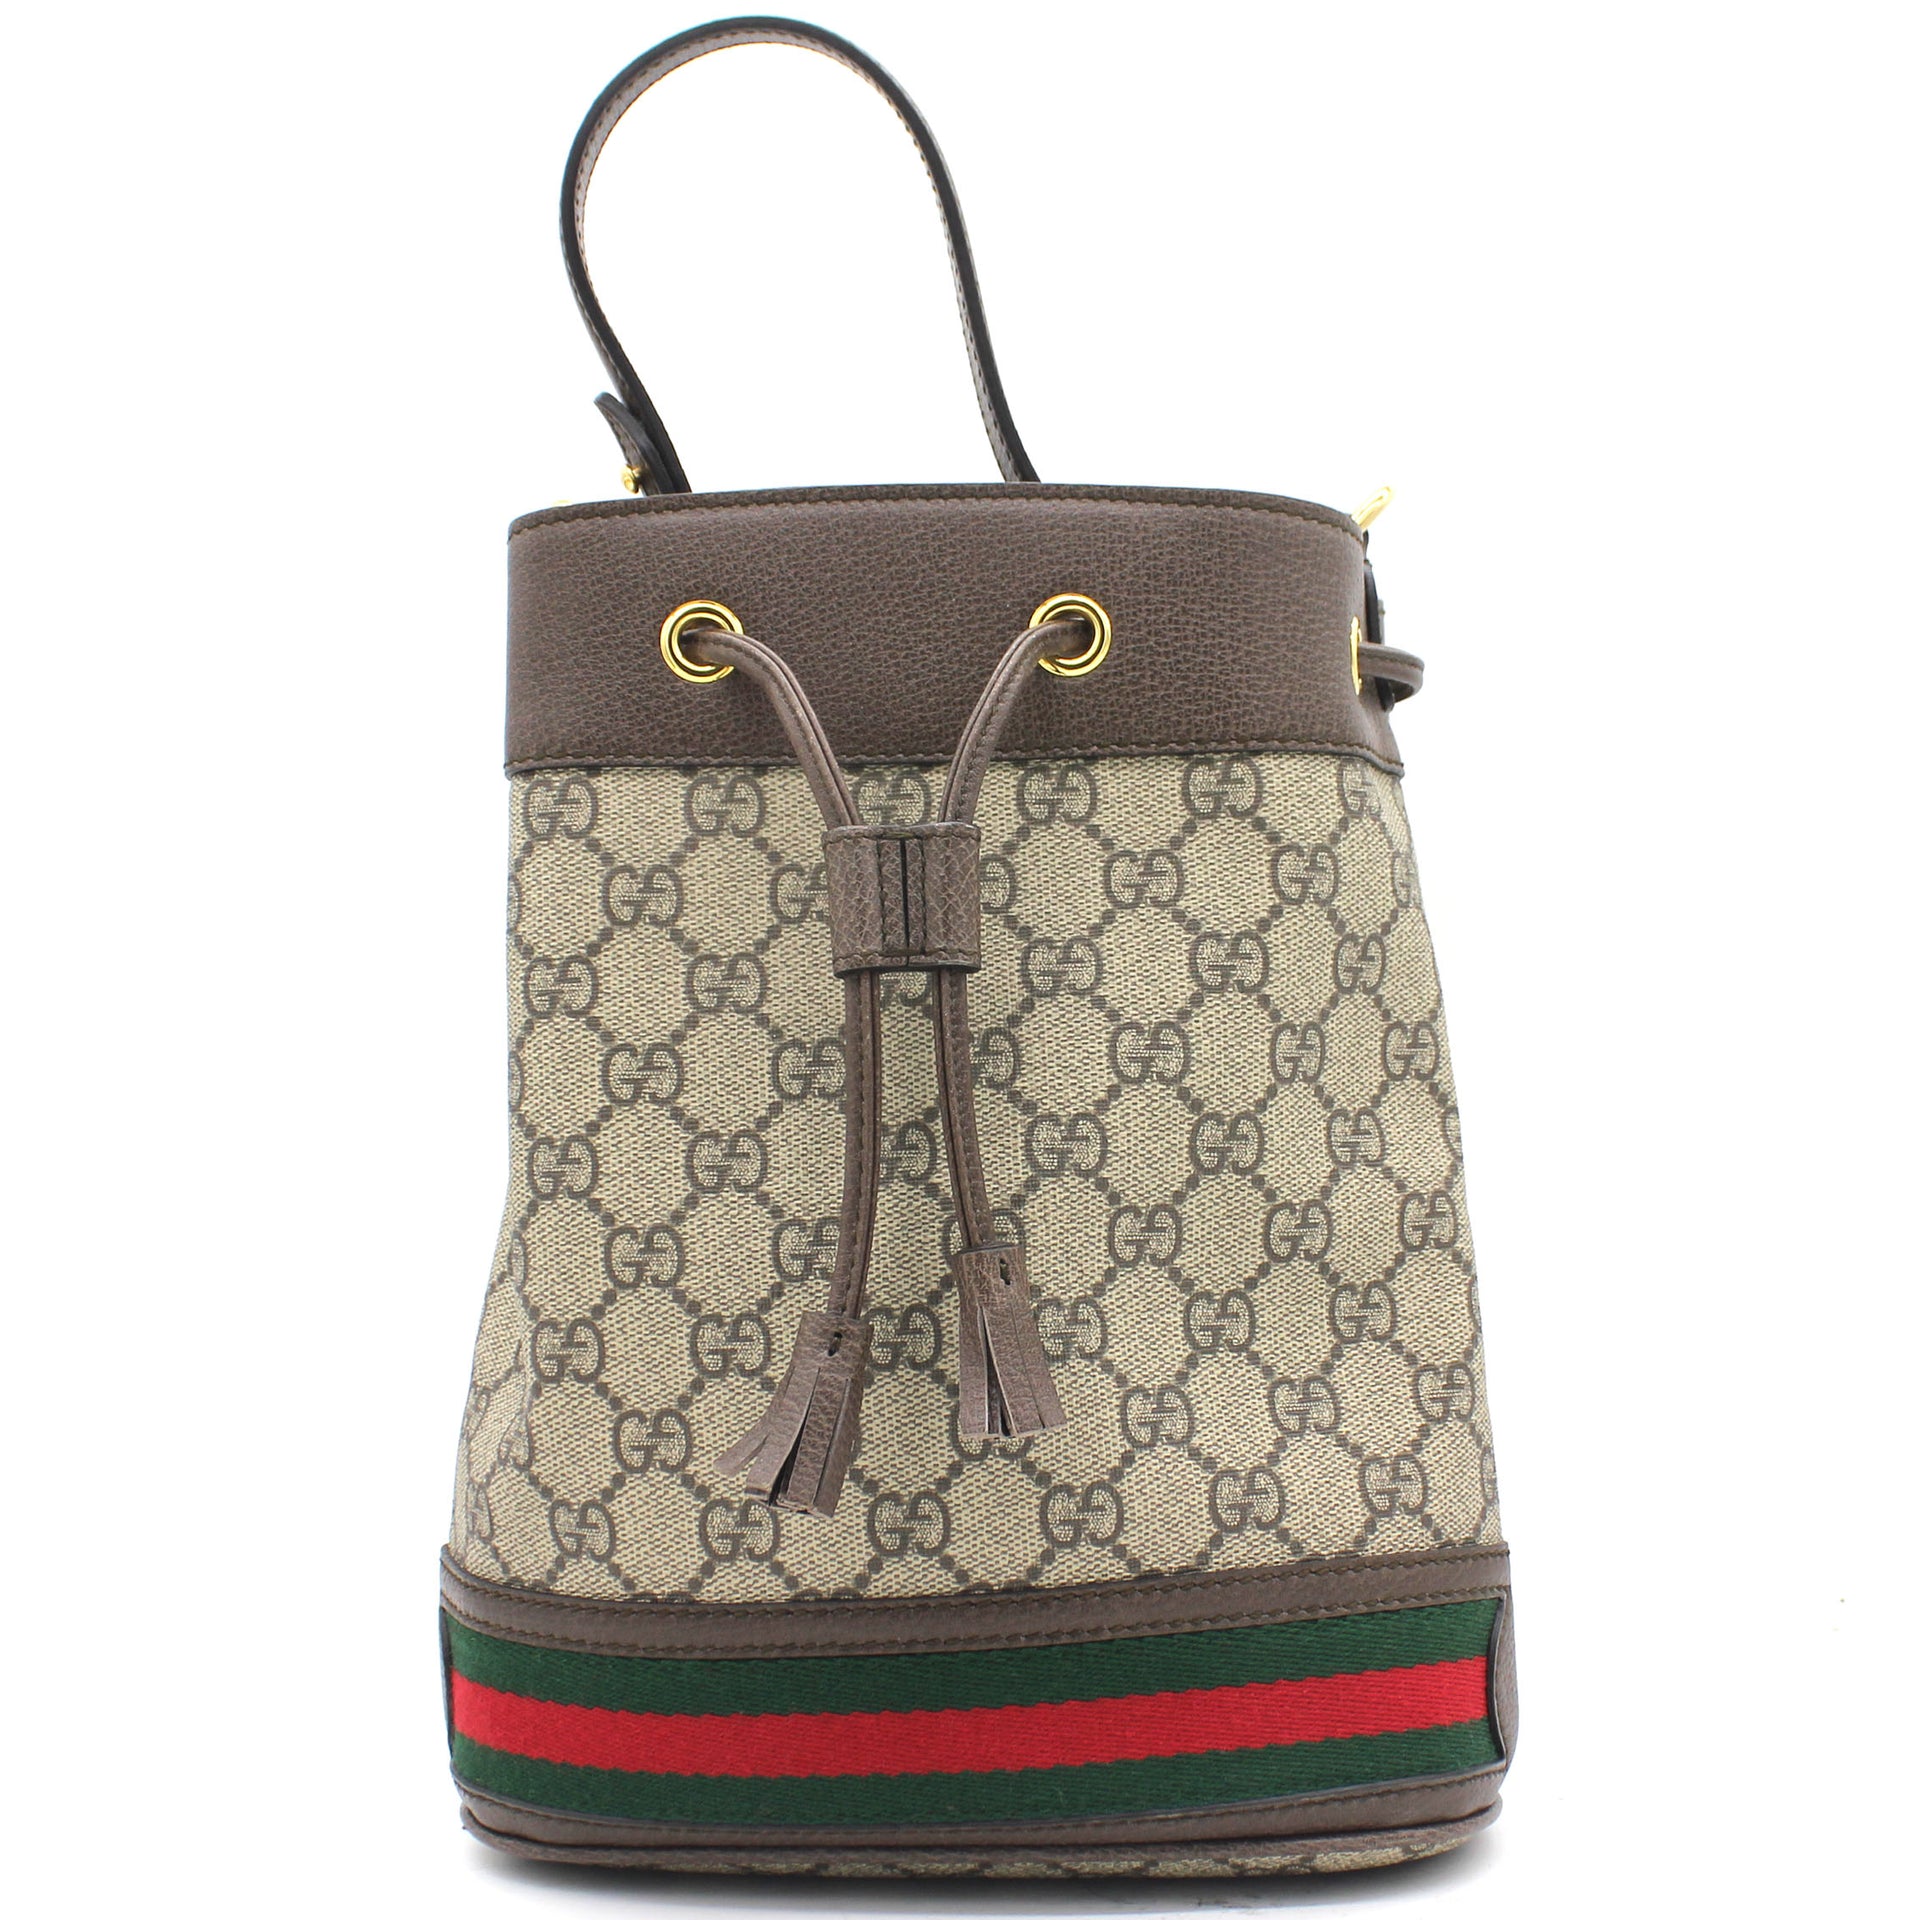 Beige/Ebony GG Supreme Canvas and Leather Small Ophidia Bucket Bag